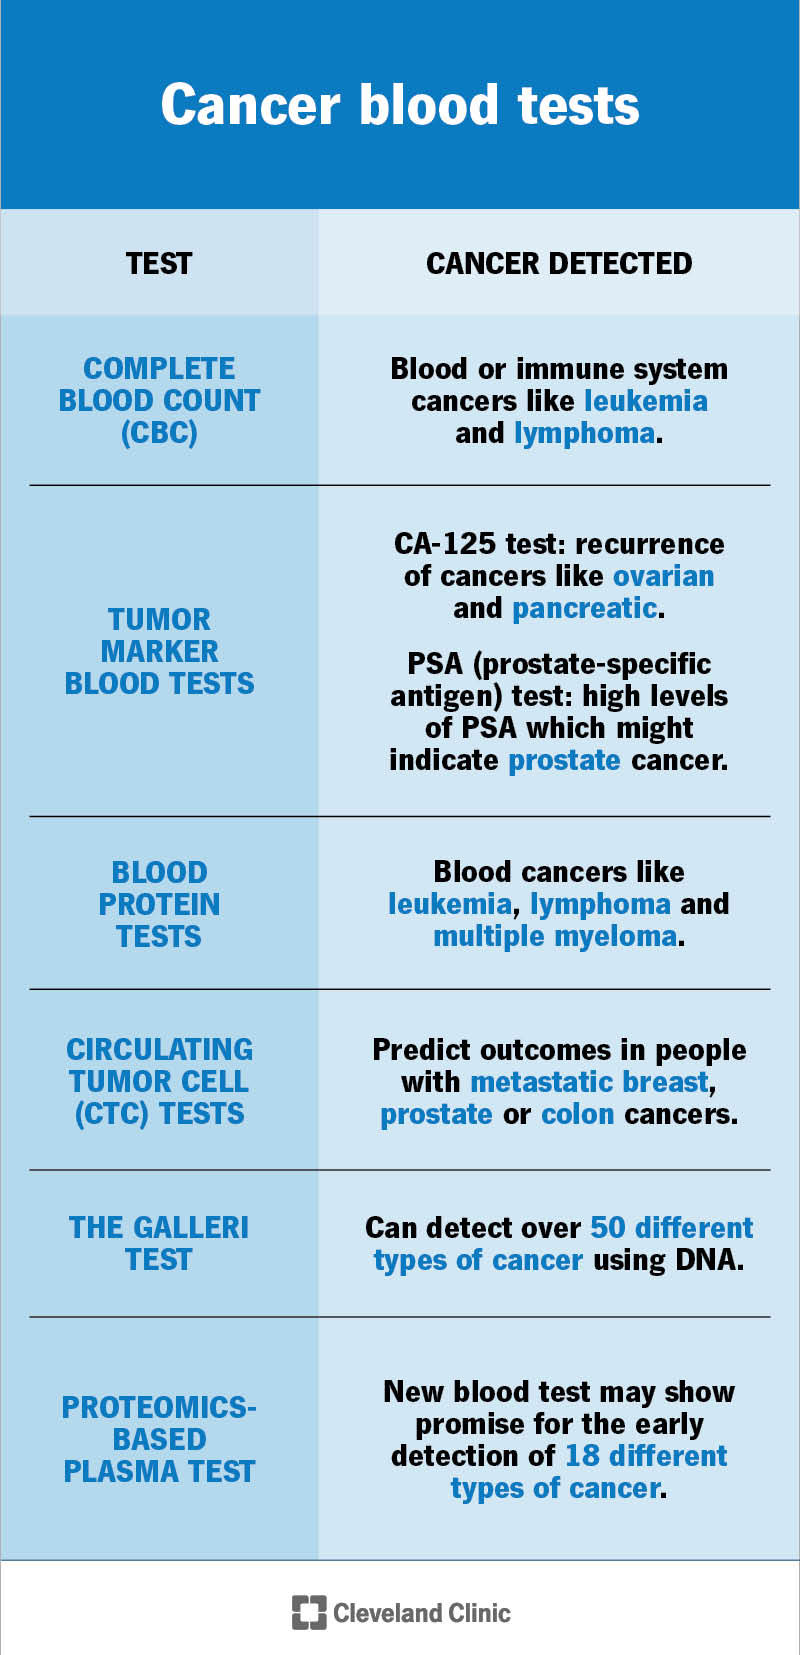 List of some common cancer blood tests and conditions they can help detect.